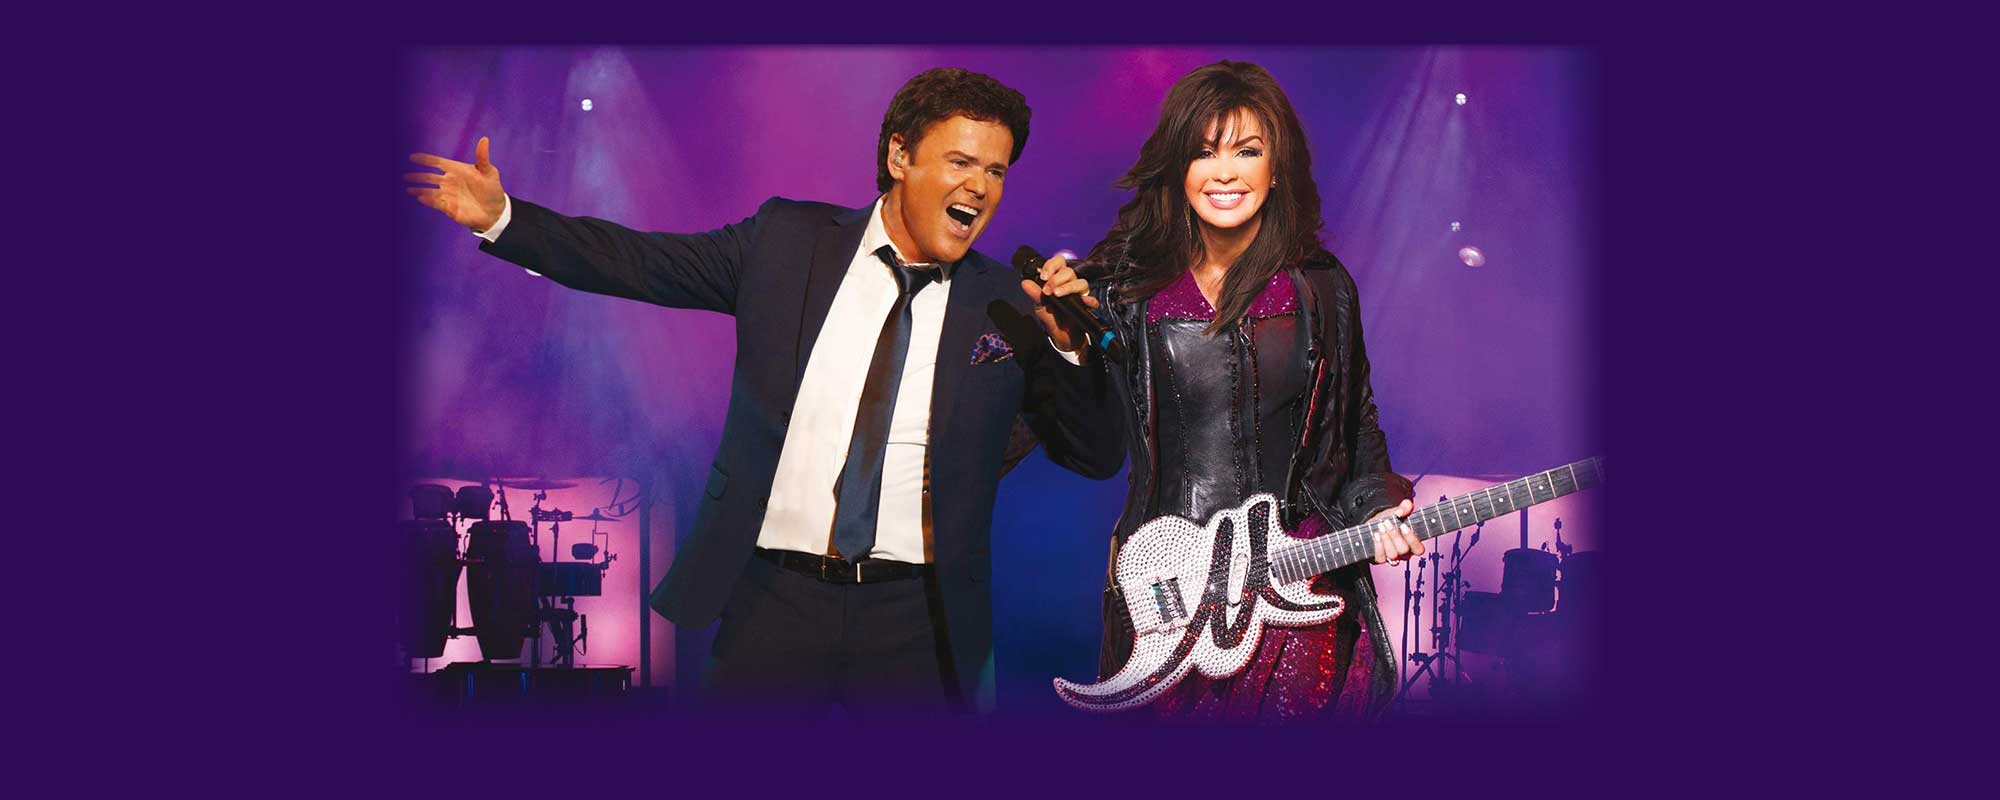 Donny and Marie Osmond Show Las Vegas: Tickets & Reviews ...